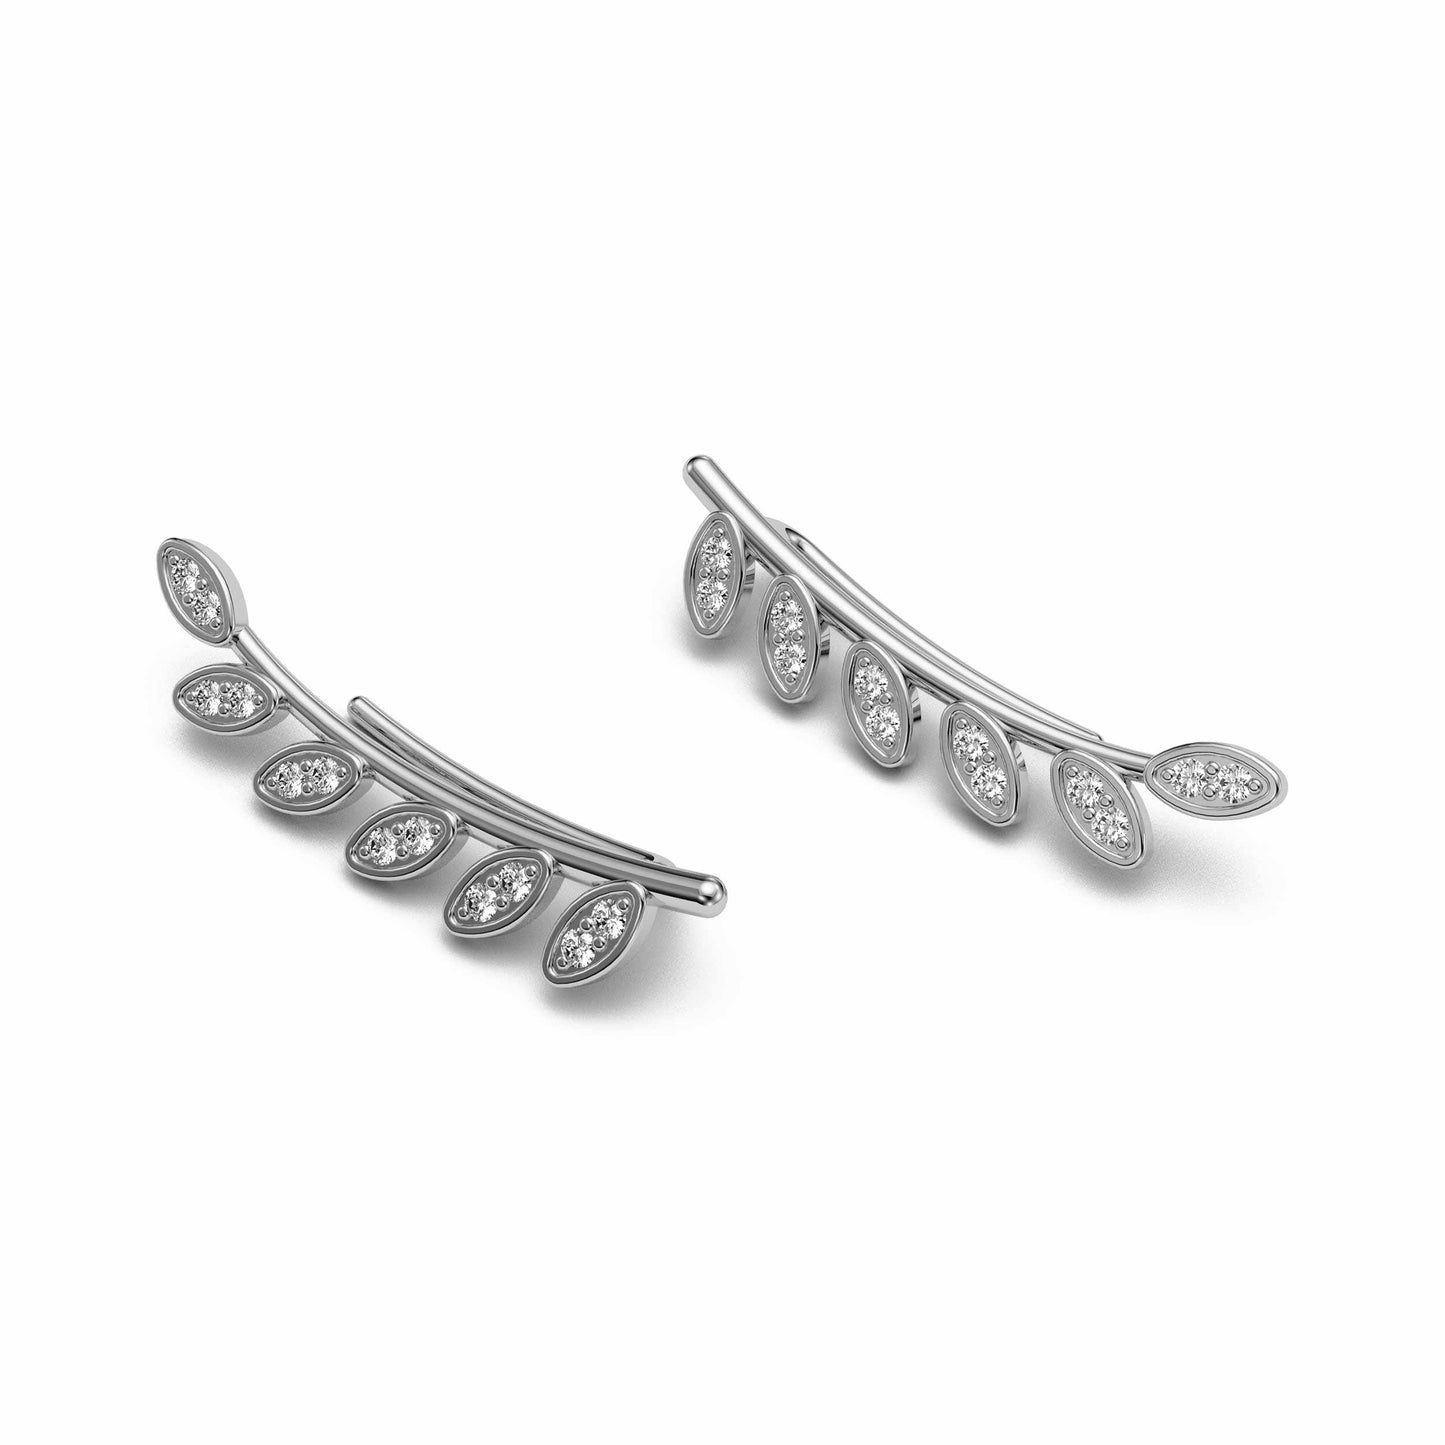 Olive Branch Moissanite Ear Climbers